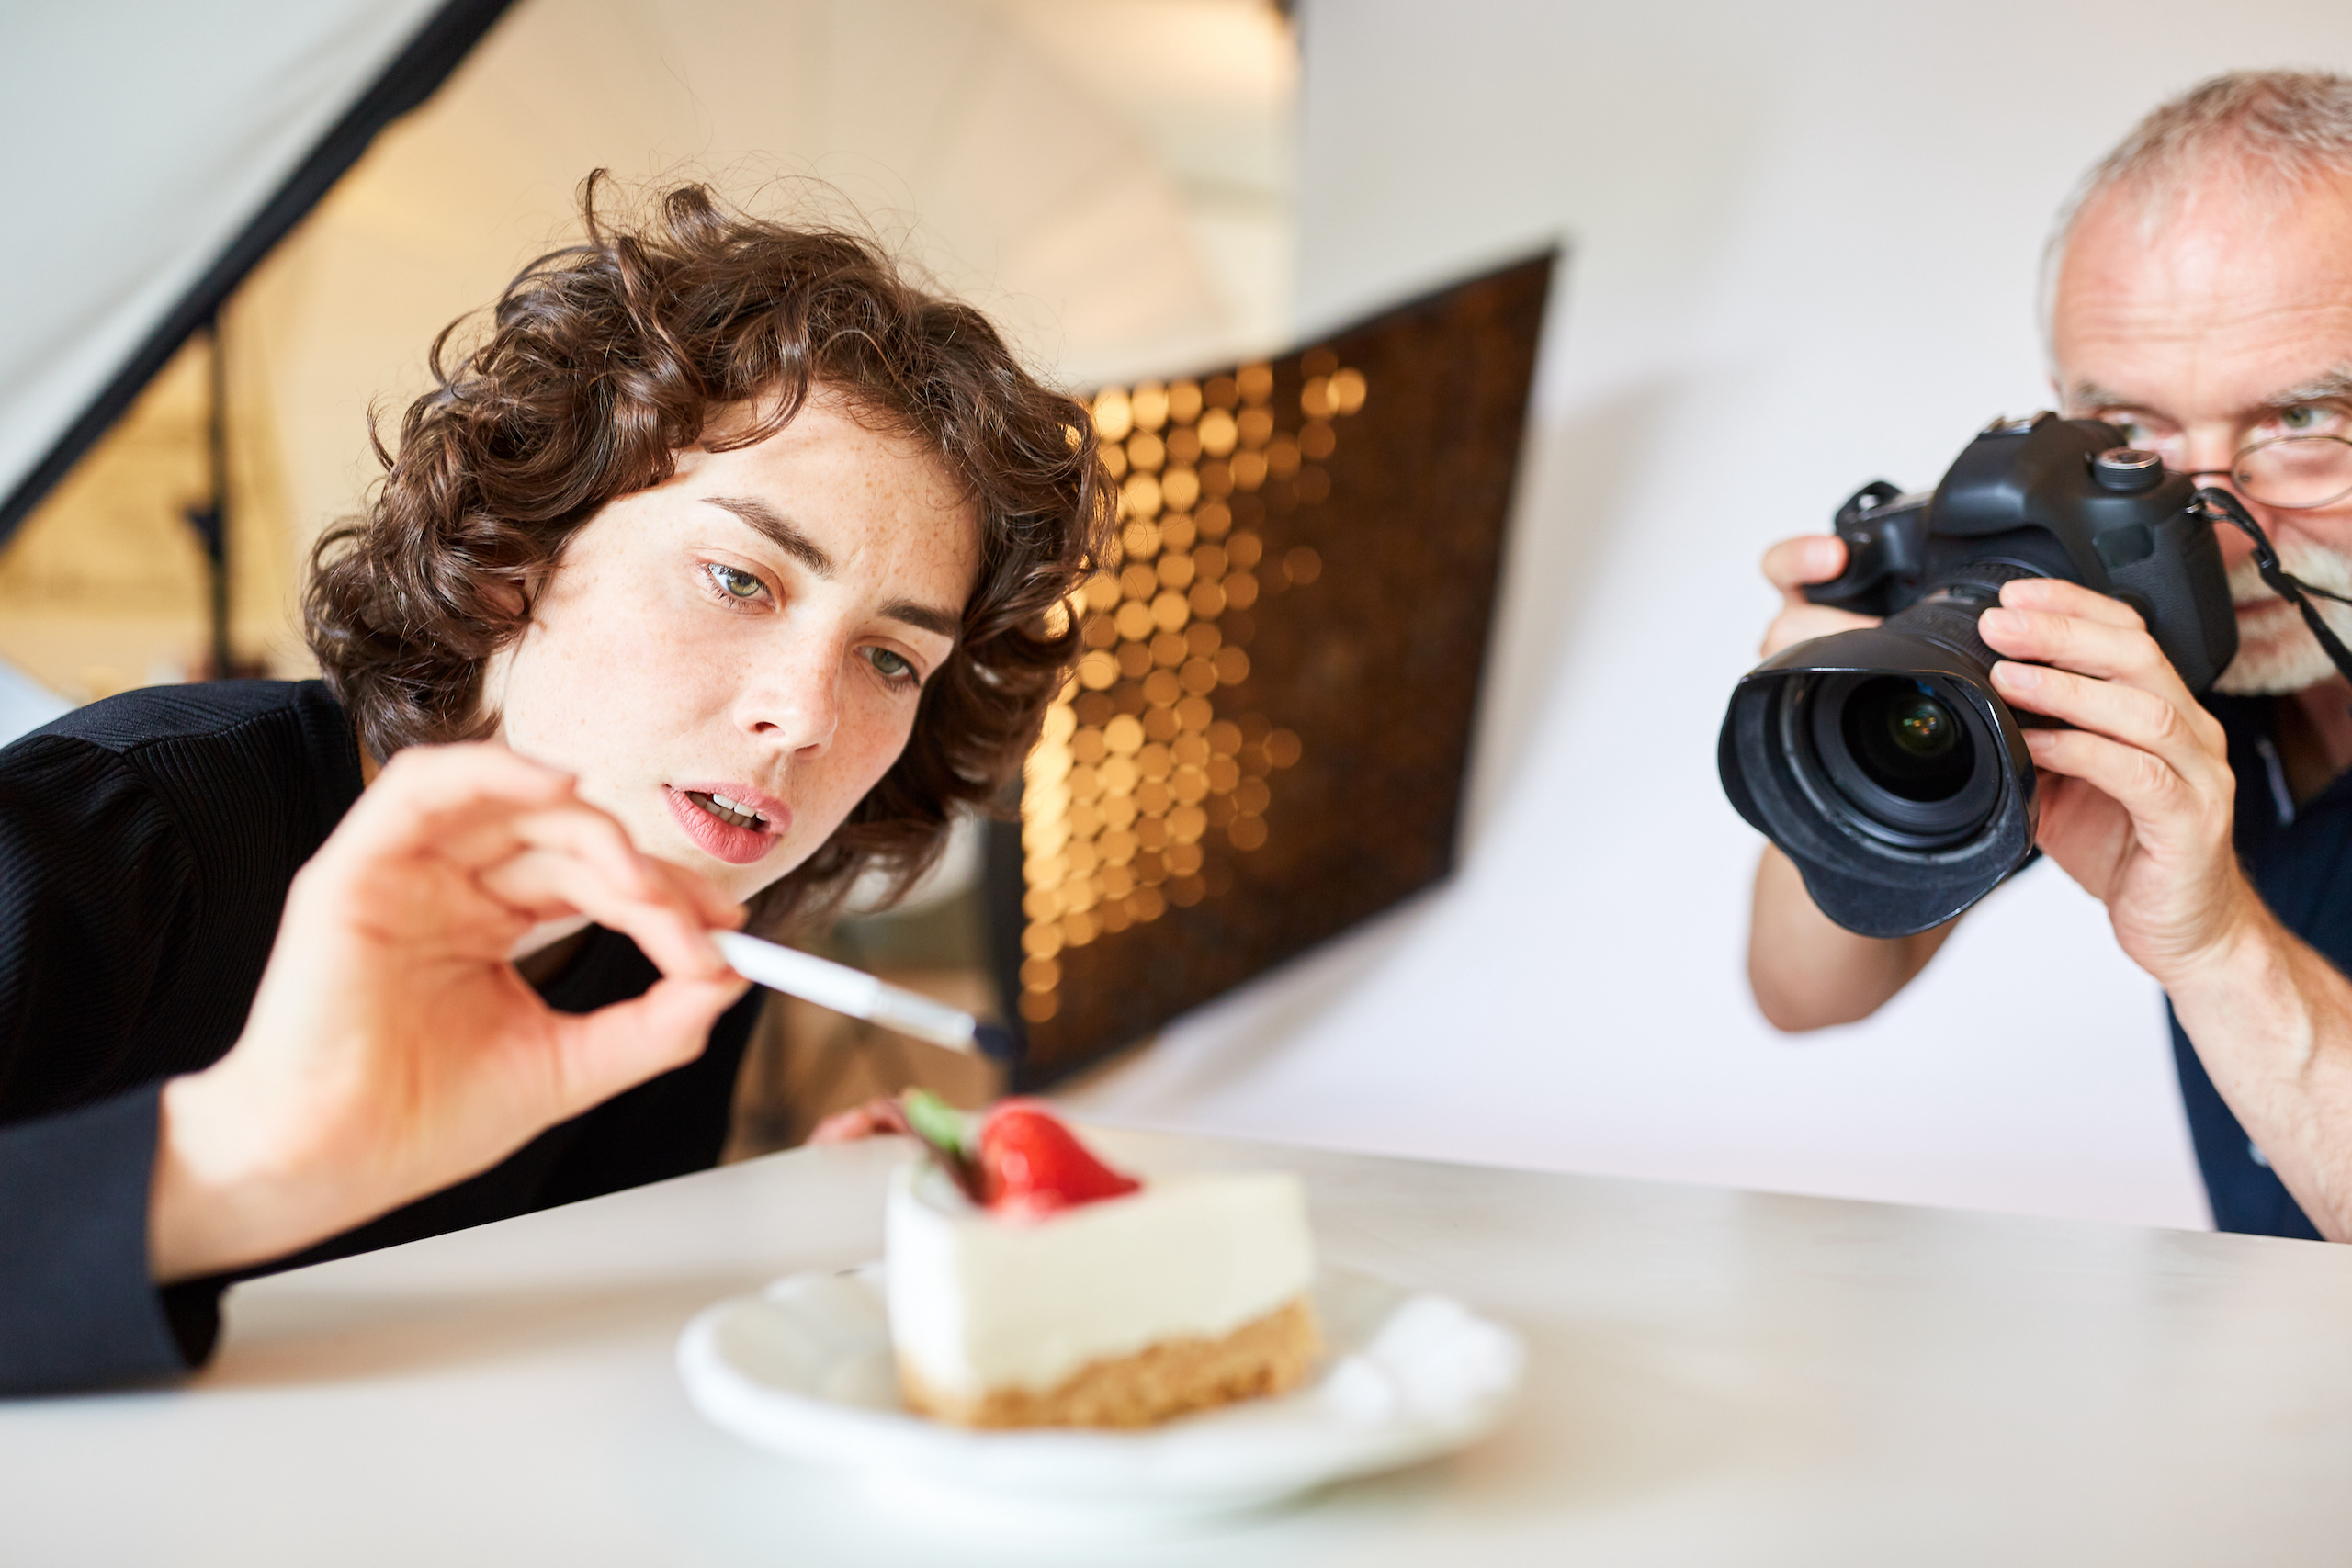 Food stylist and photographer with camera